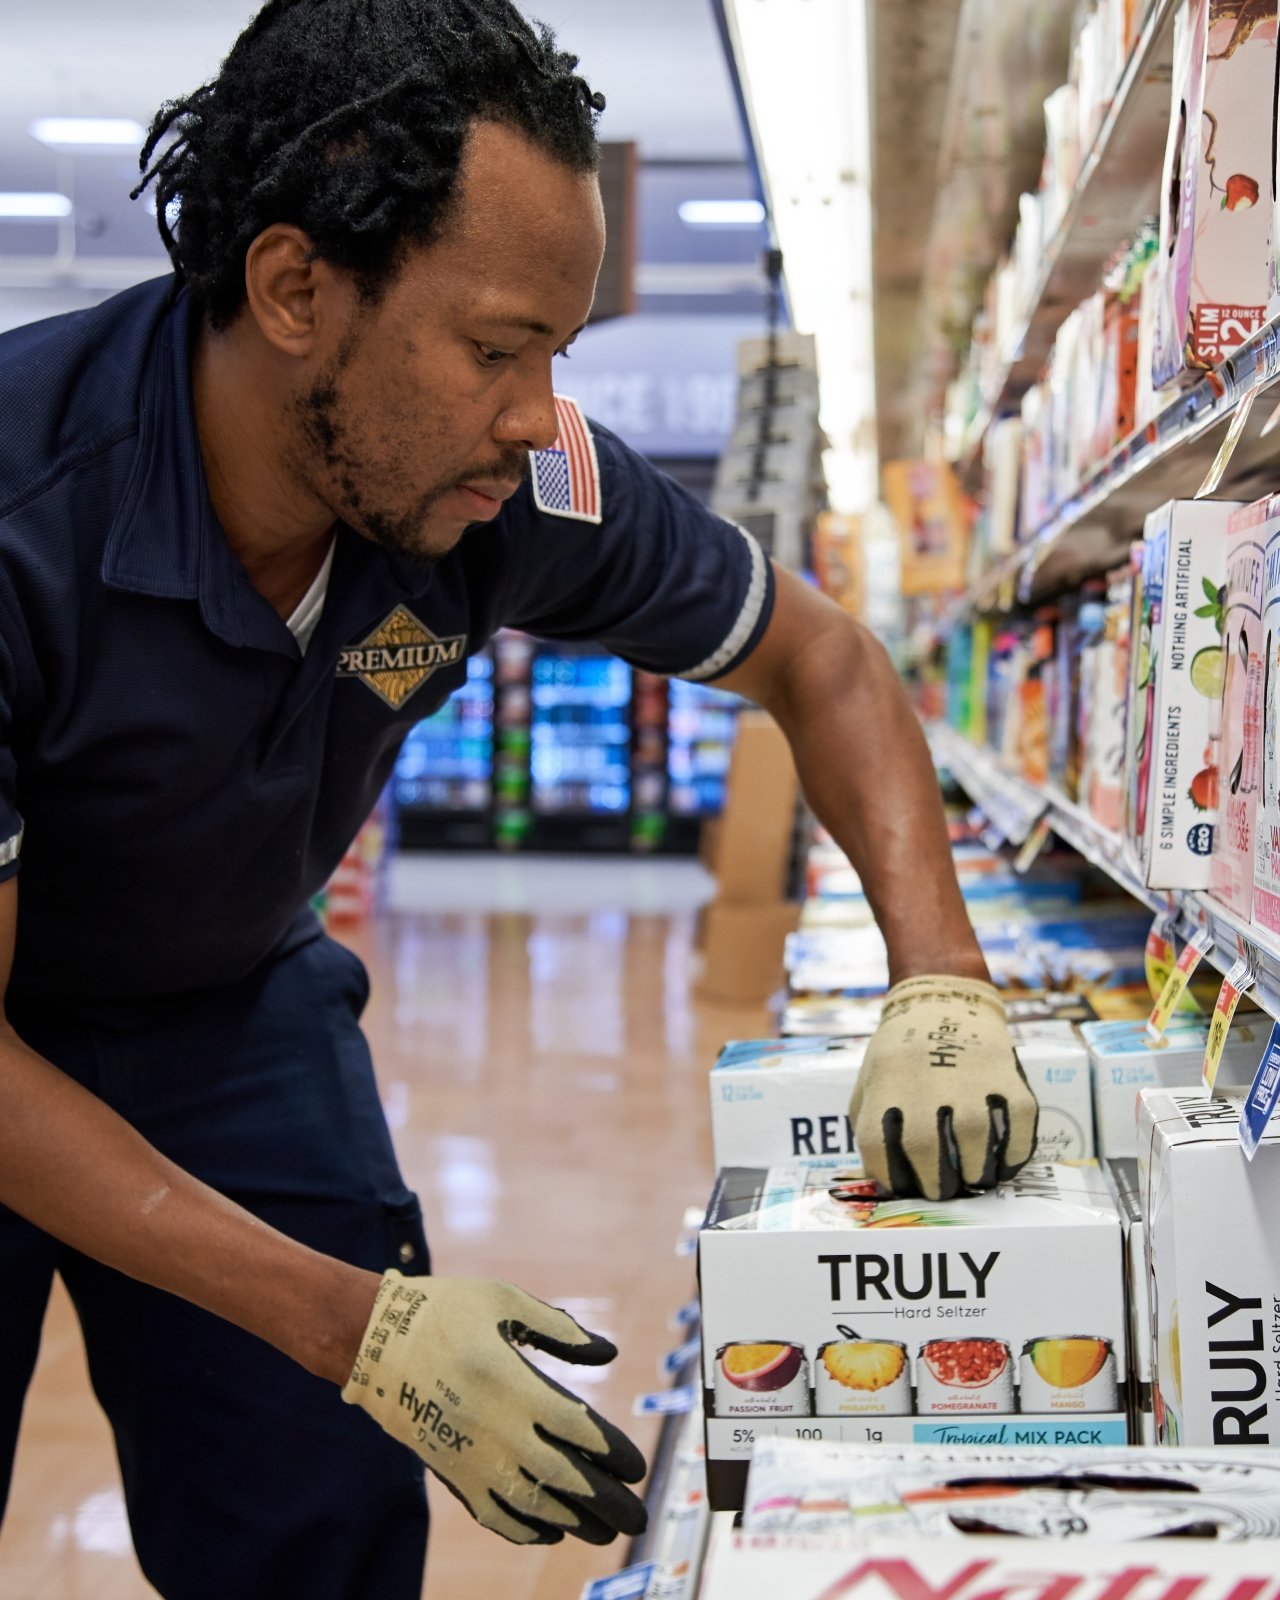 A man in a navy polo type shirt adding product to a retail cooler space